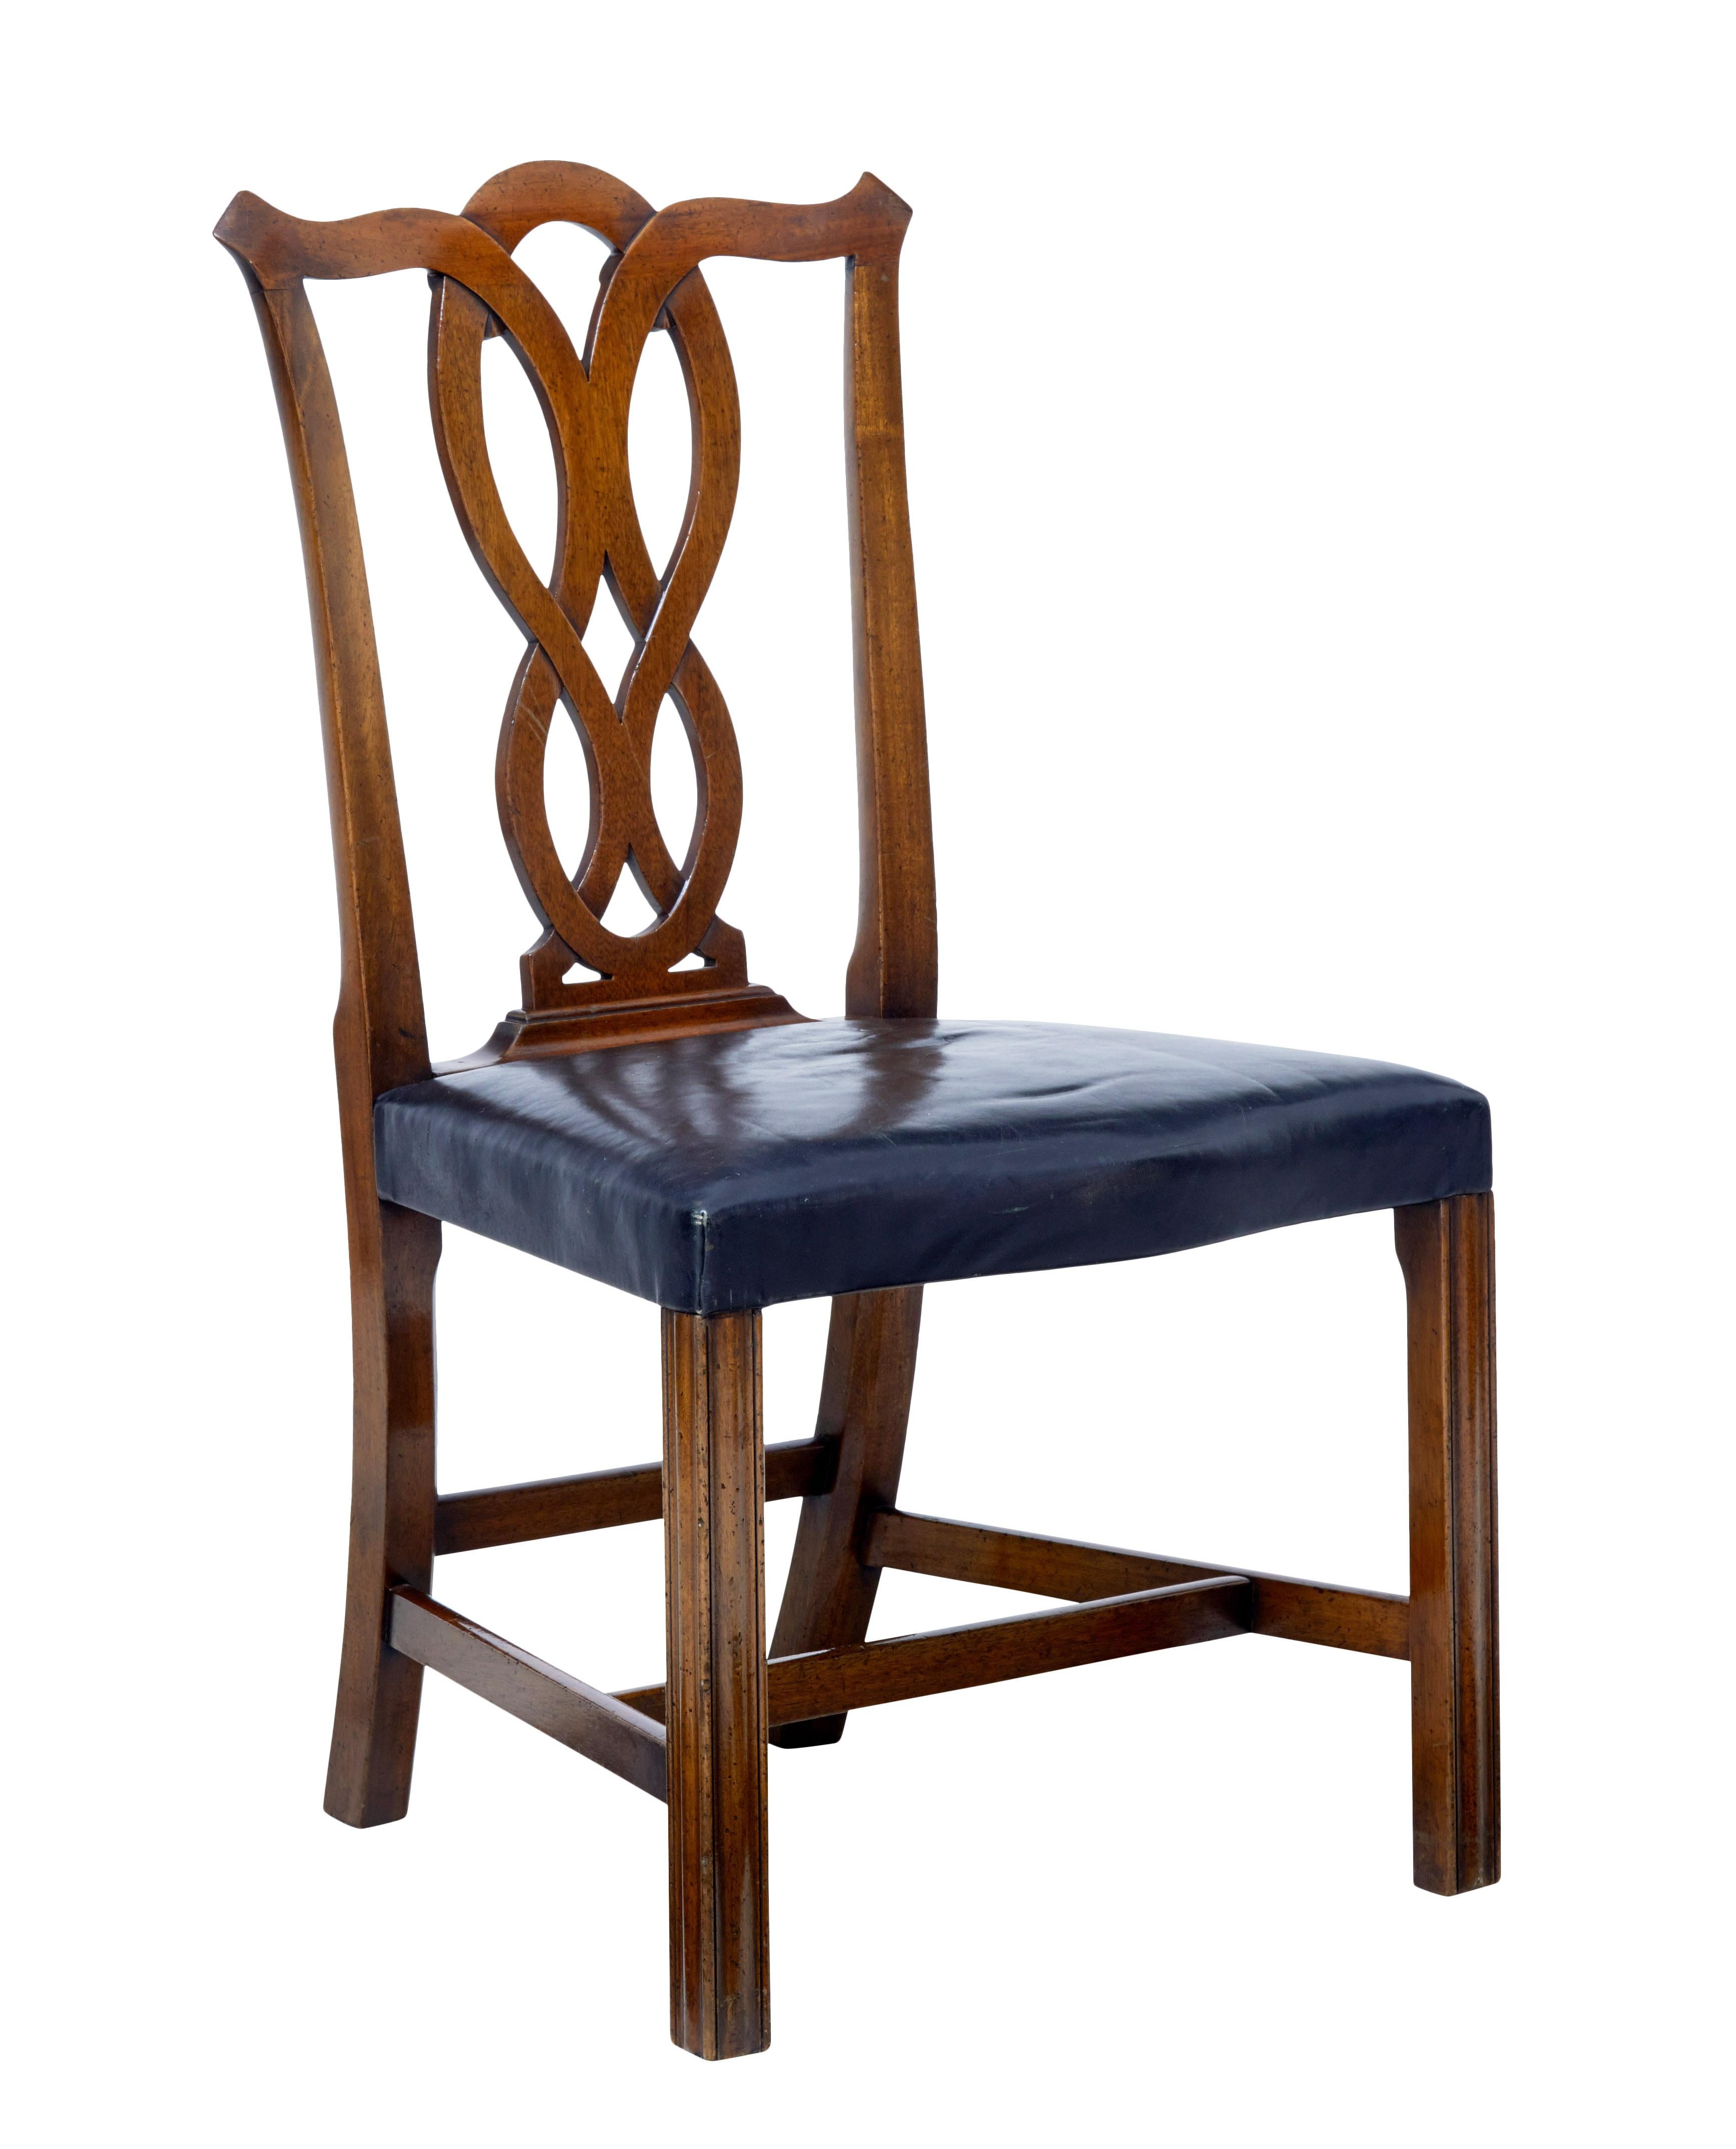 Fine small set of four dining chairs by well known Swedish retailers Nordiska Kompaniet, circa 1930.

Beautiful Chippendale influenced walnut chairs, with scrolling latice backs. Black leather seats, standing on straight legs united by